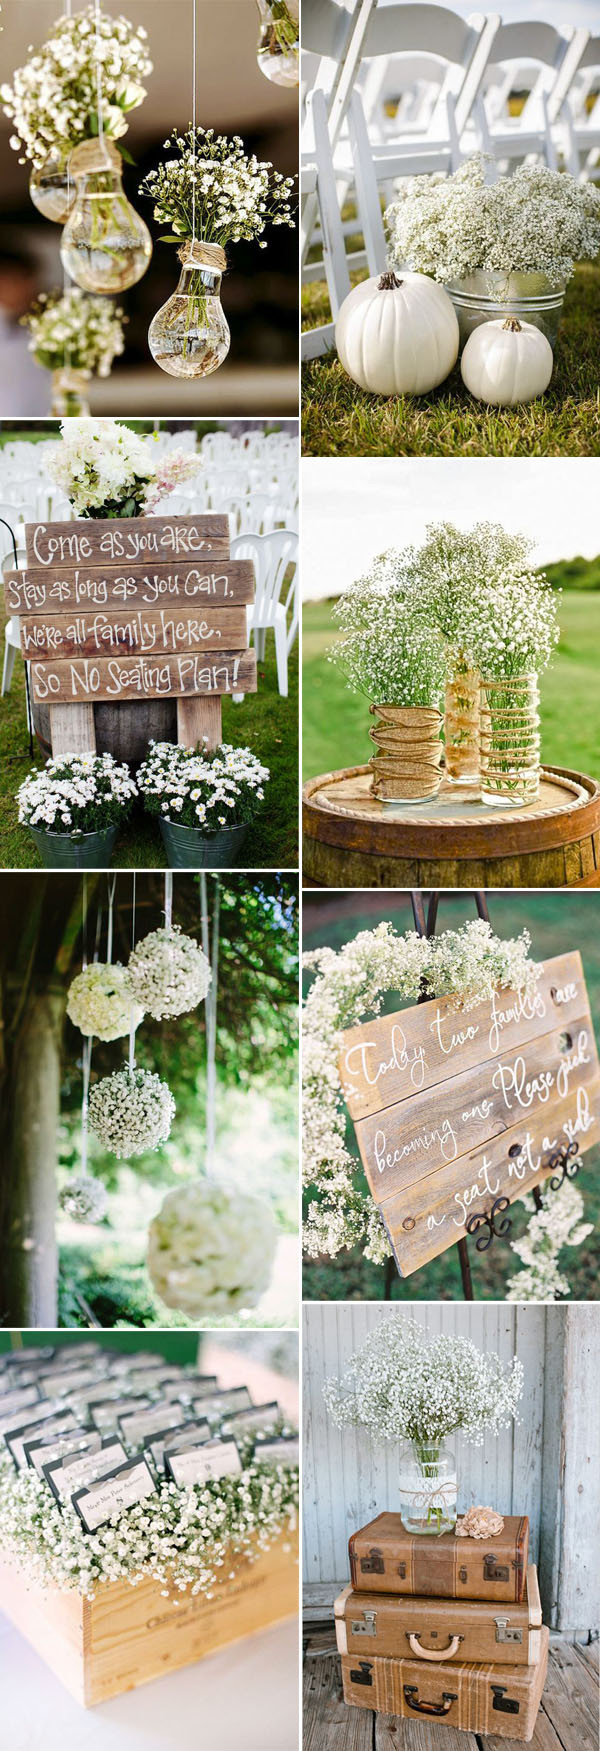 Ideas For Wedding Decorations
 Save Your Bud on Weddings with 45 Baby’s Breath Ideas